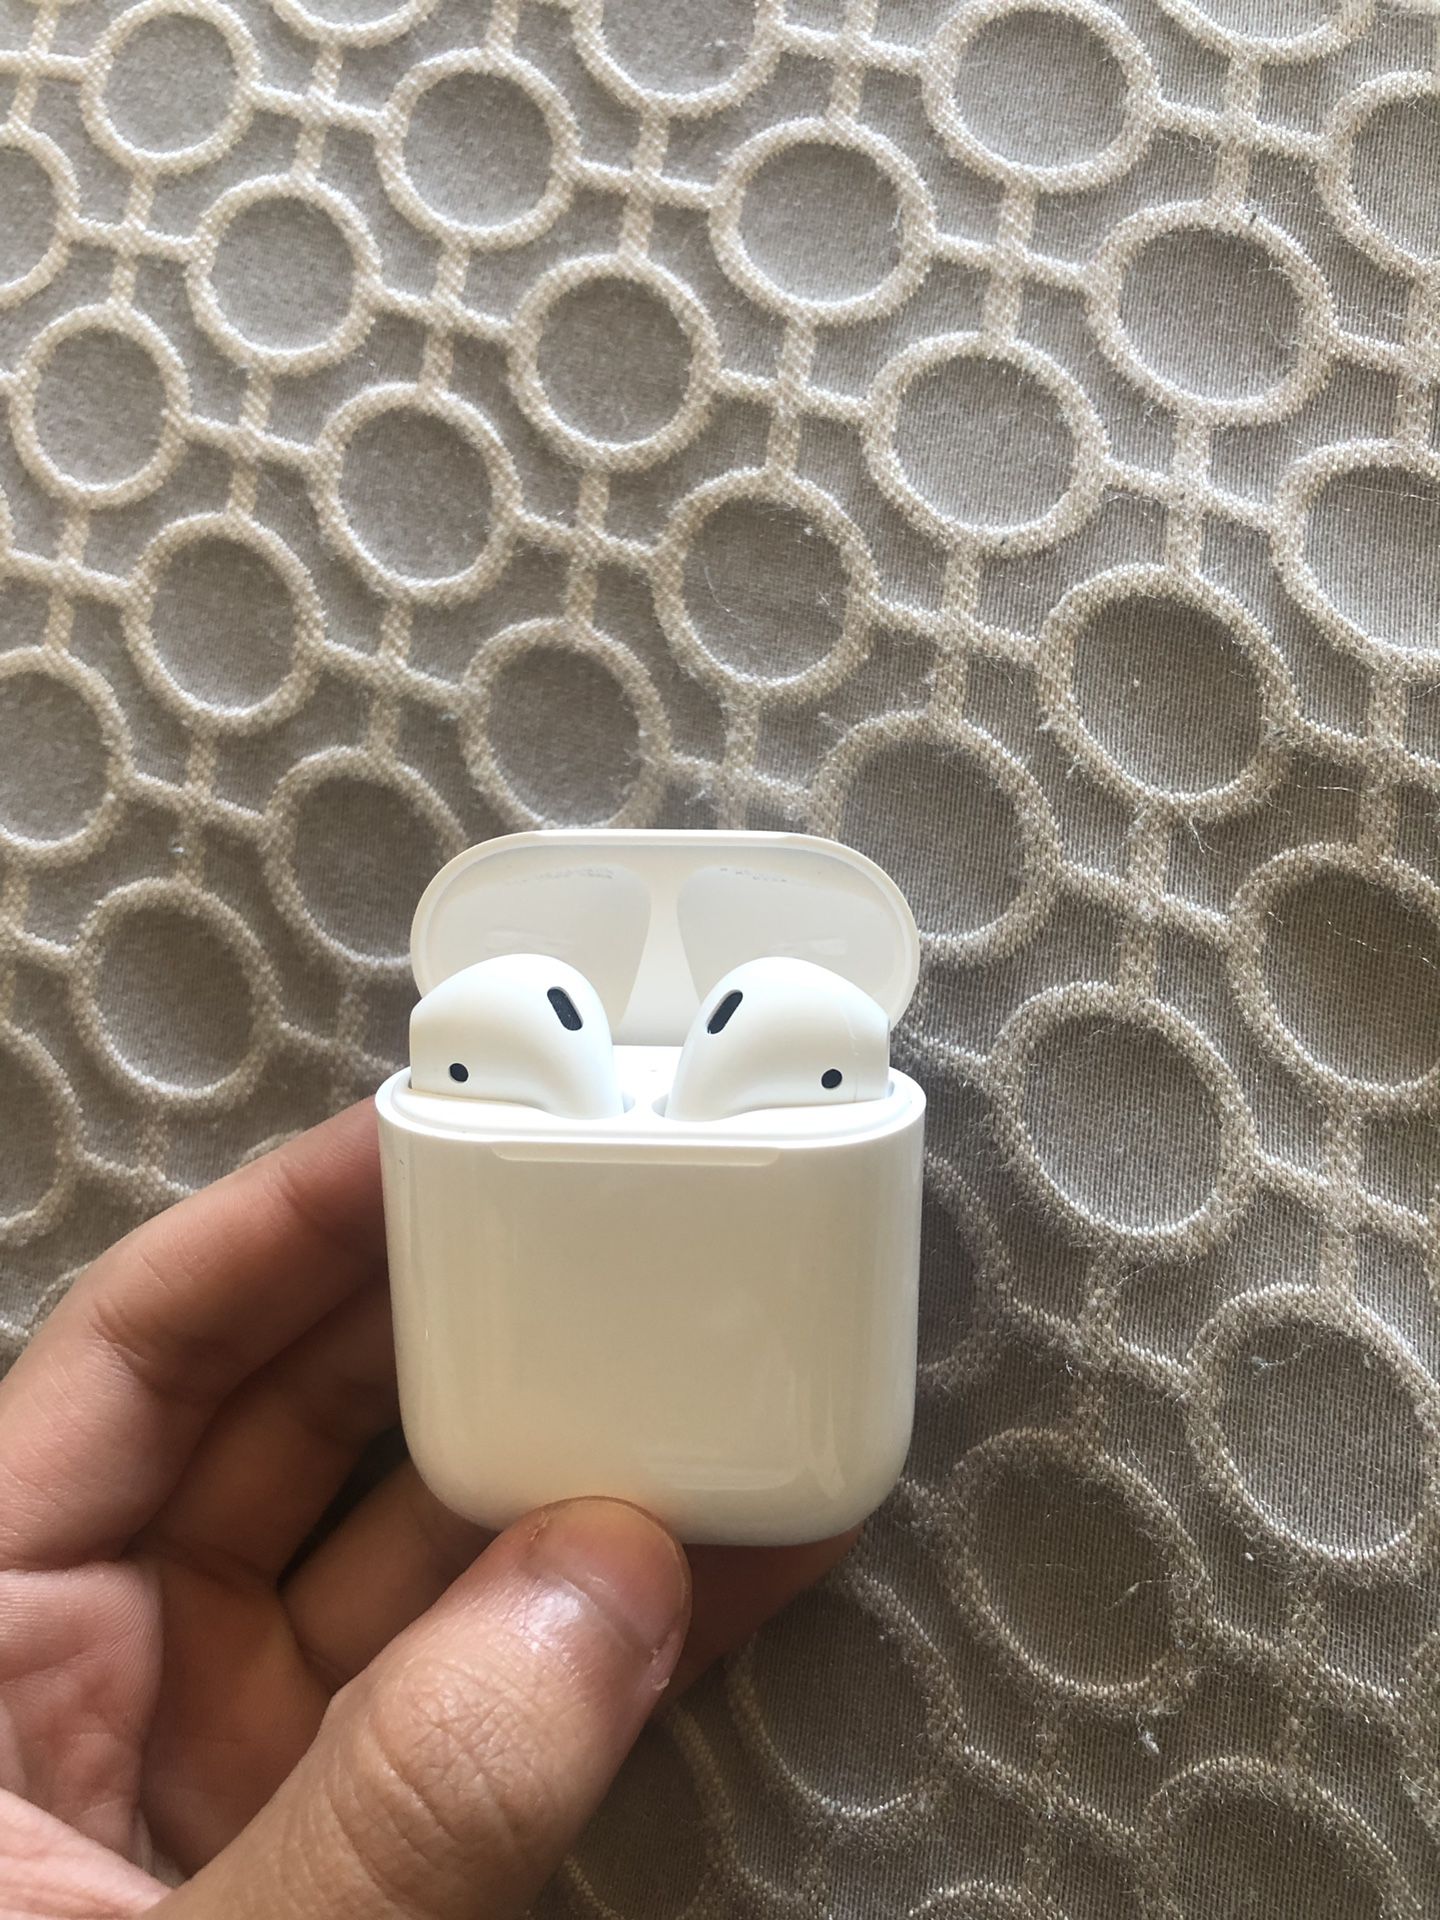 NOT APPLE Earbuds Headphones Headset Mobile Airpods